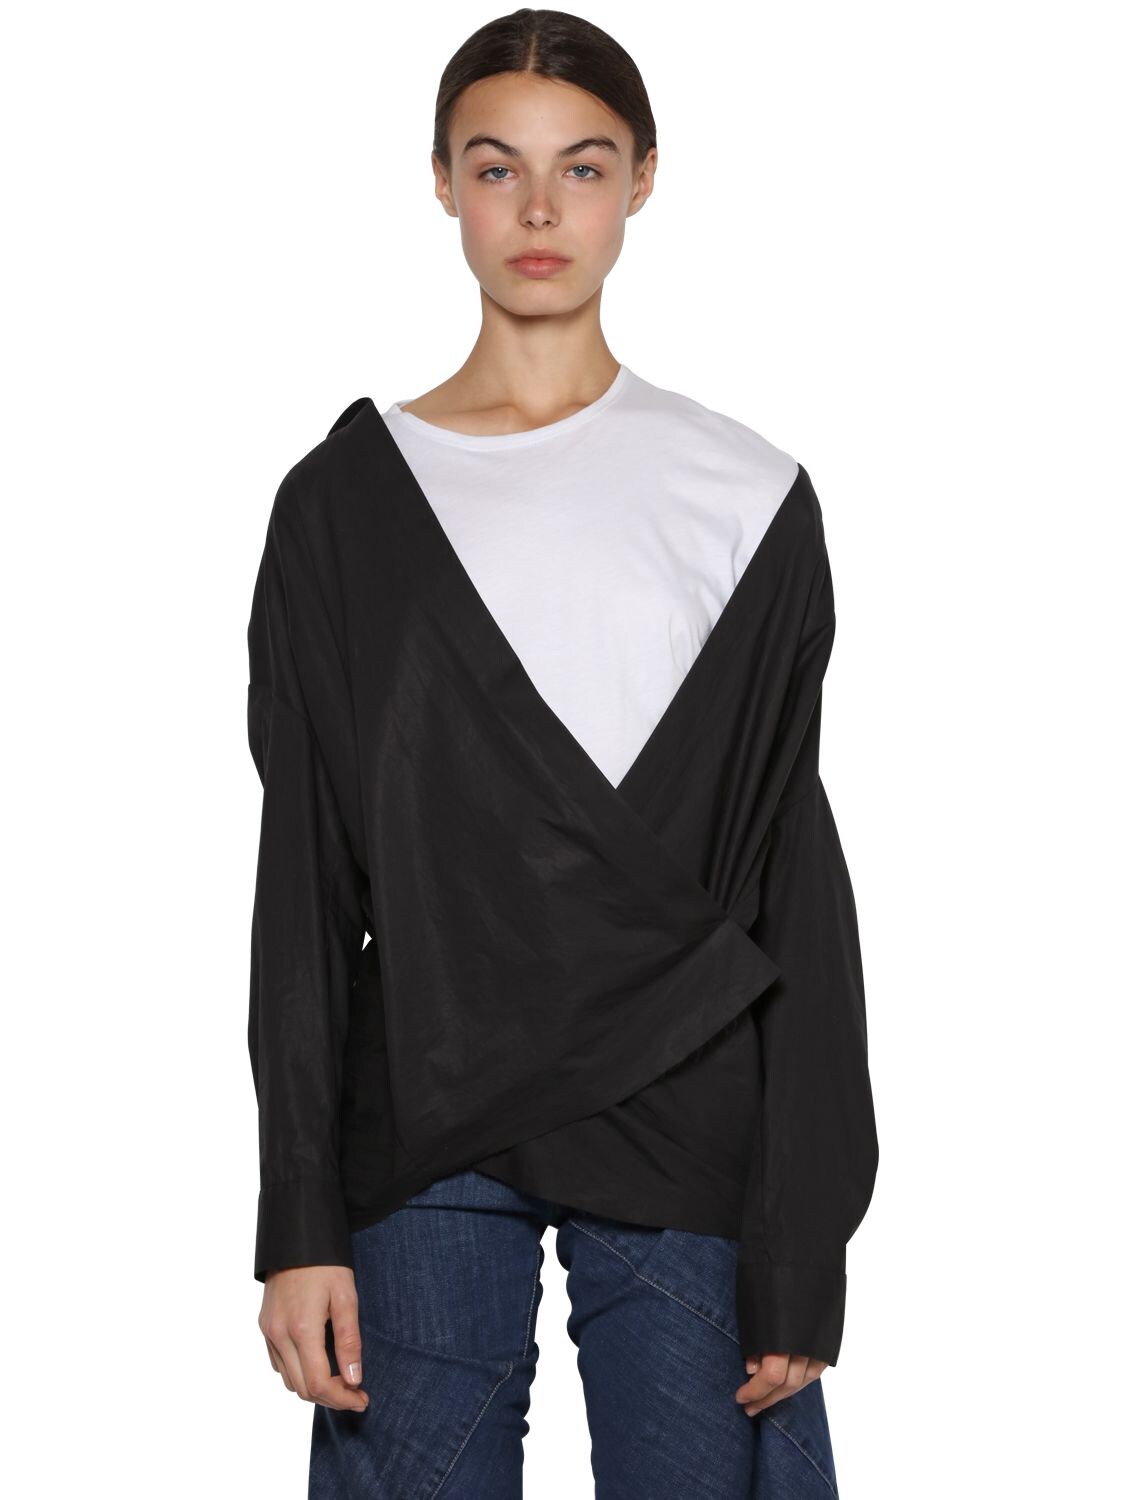 Act N°1 Oversize Cotton Shirt & Jersey T-shirt In Black,white